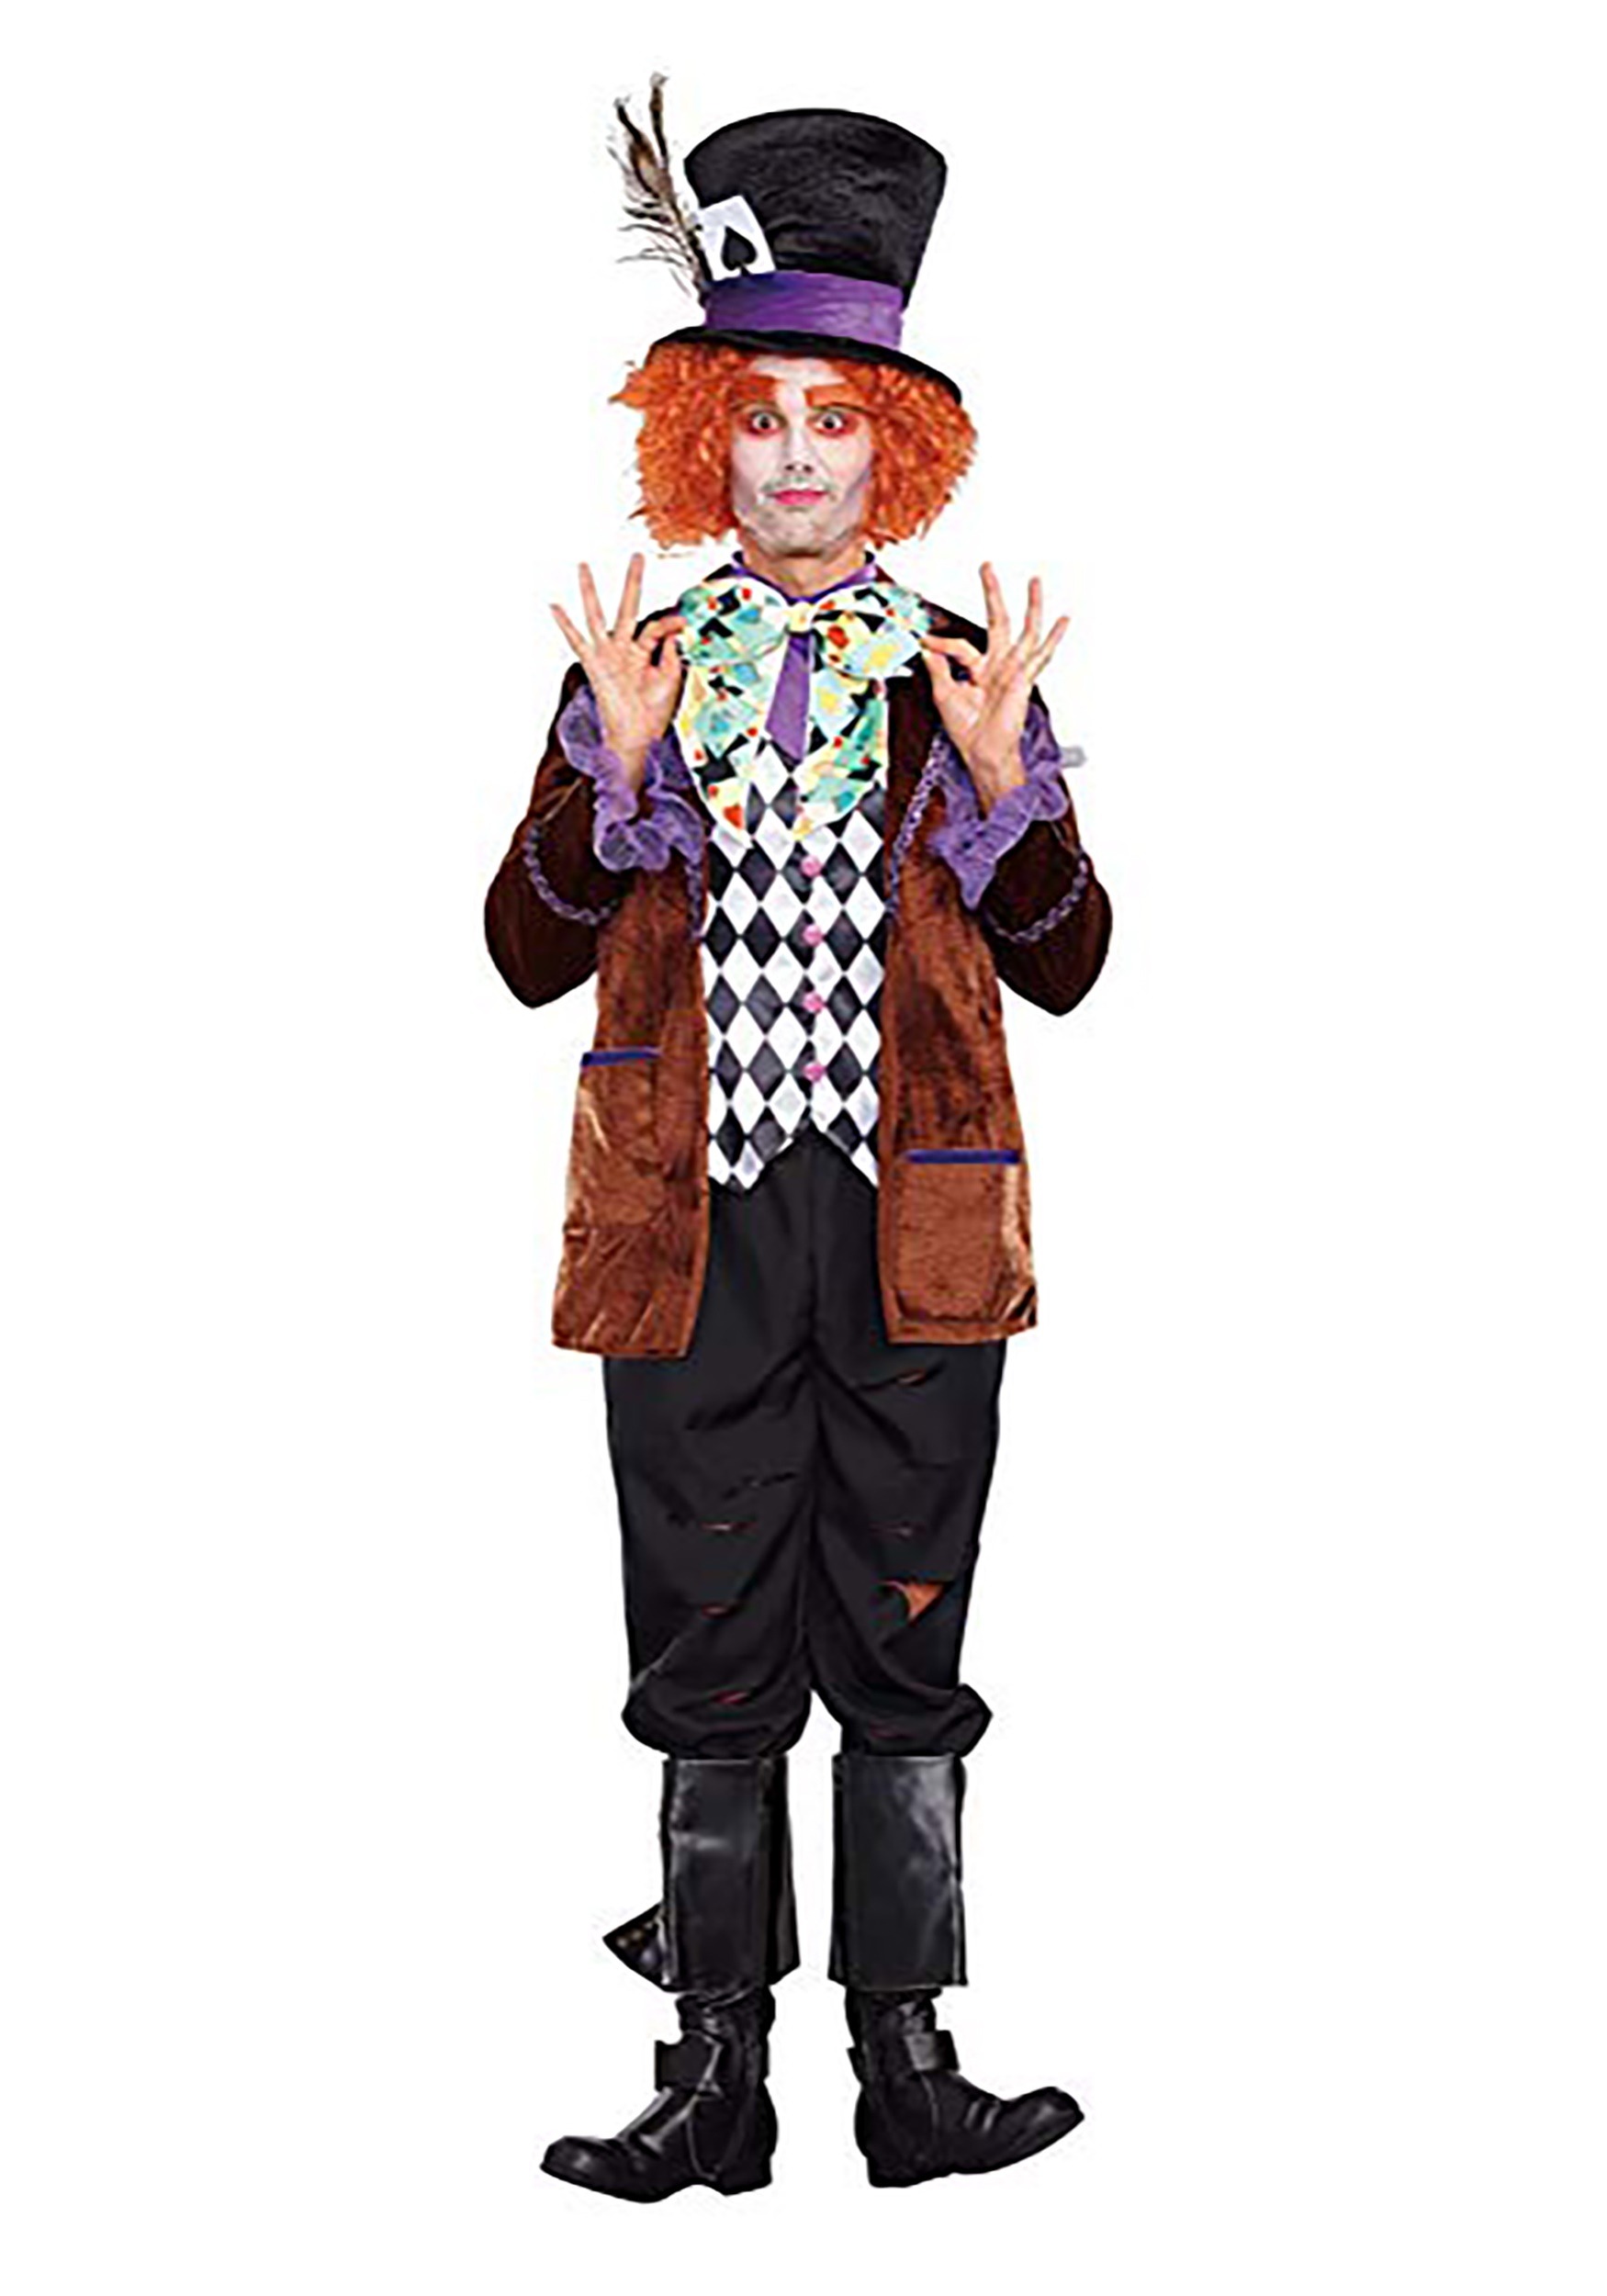 Image of Hatter Madness Costume for Men ID DR10297-M